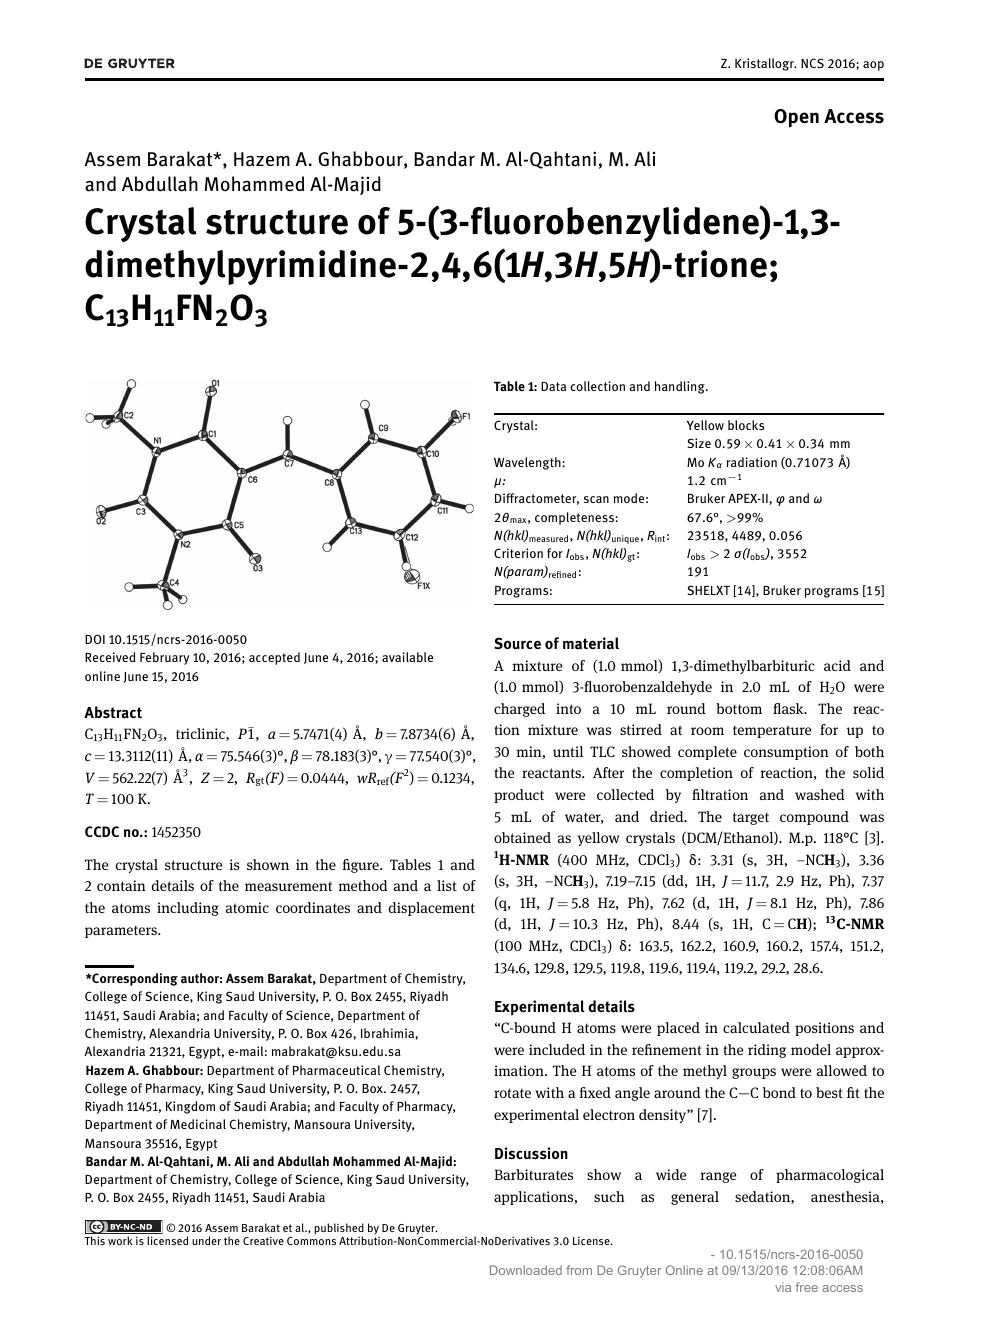 Crystal Structure Of 5 3 Fluorobenzylidene 1 3 Dimethylpyrimidine 2 4 6 1h 3h 5h Trione C13h11fn2o3 Topic Of Research Paper In Chemical Sciences Download Scholarly Article Pdf And Read For Free On Cyberleninka Open Science Hub